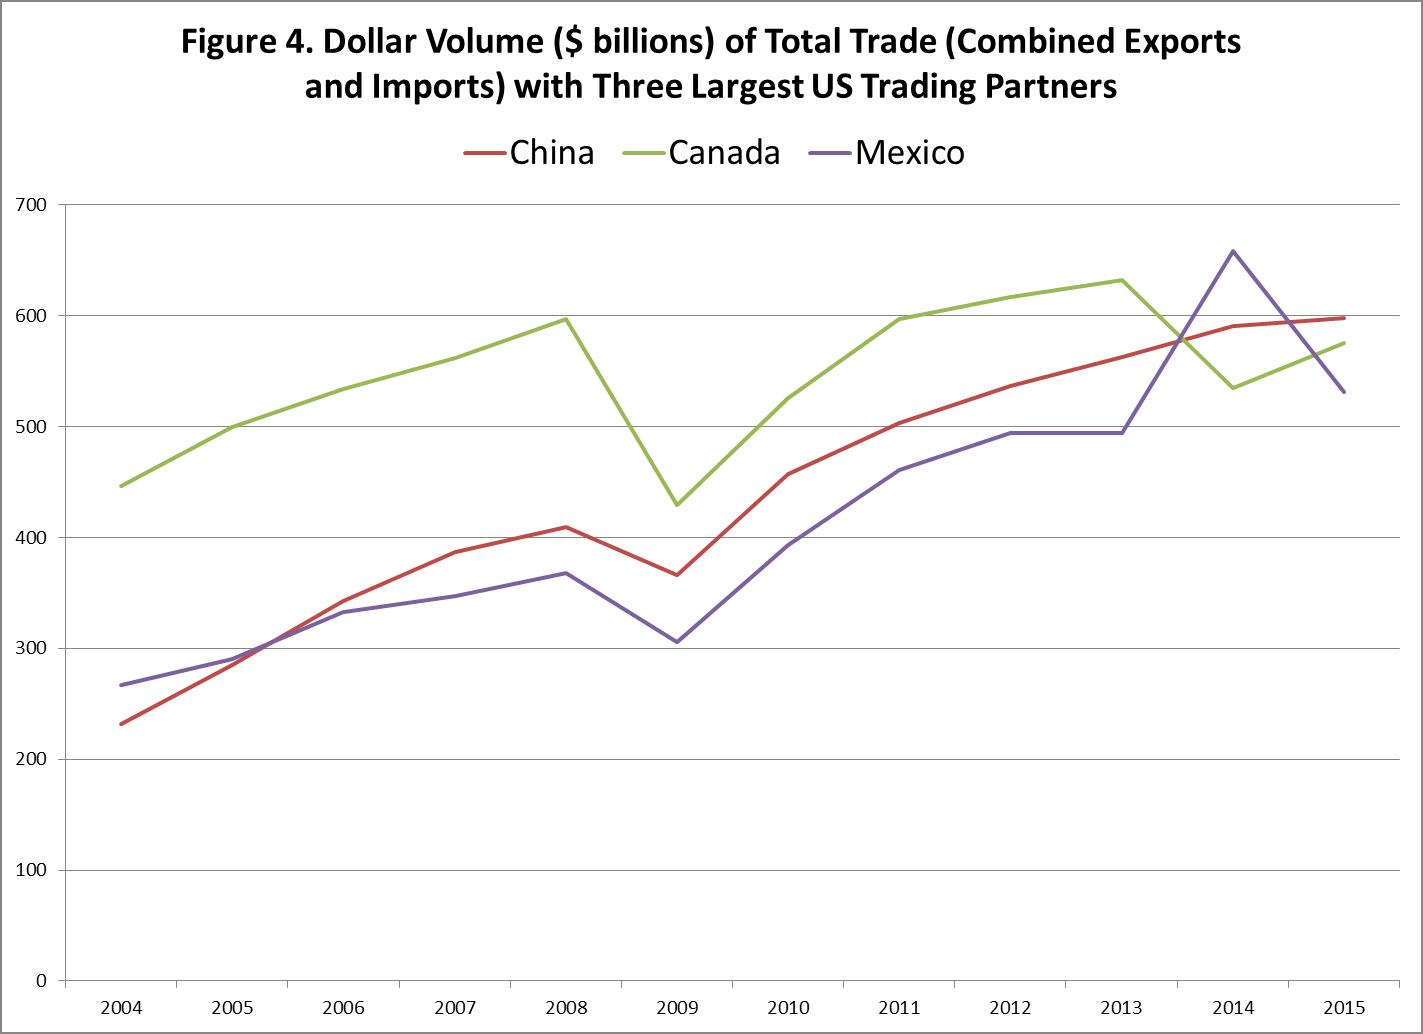 Dollar Volume Of Total Trade With Three Largest US Trading Partners